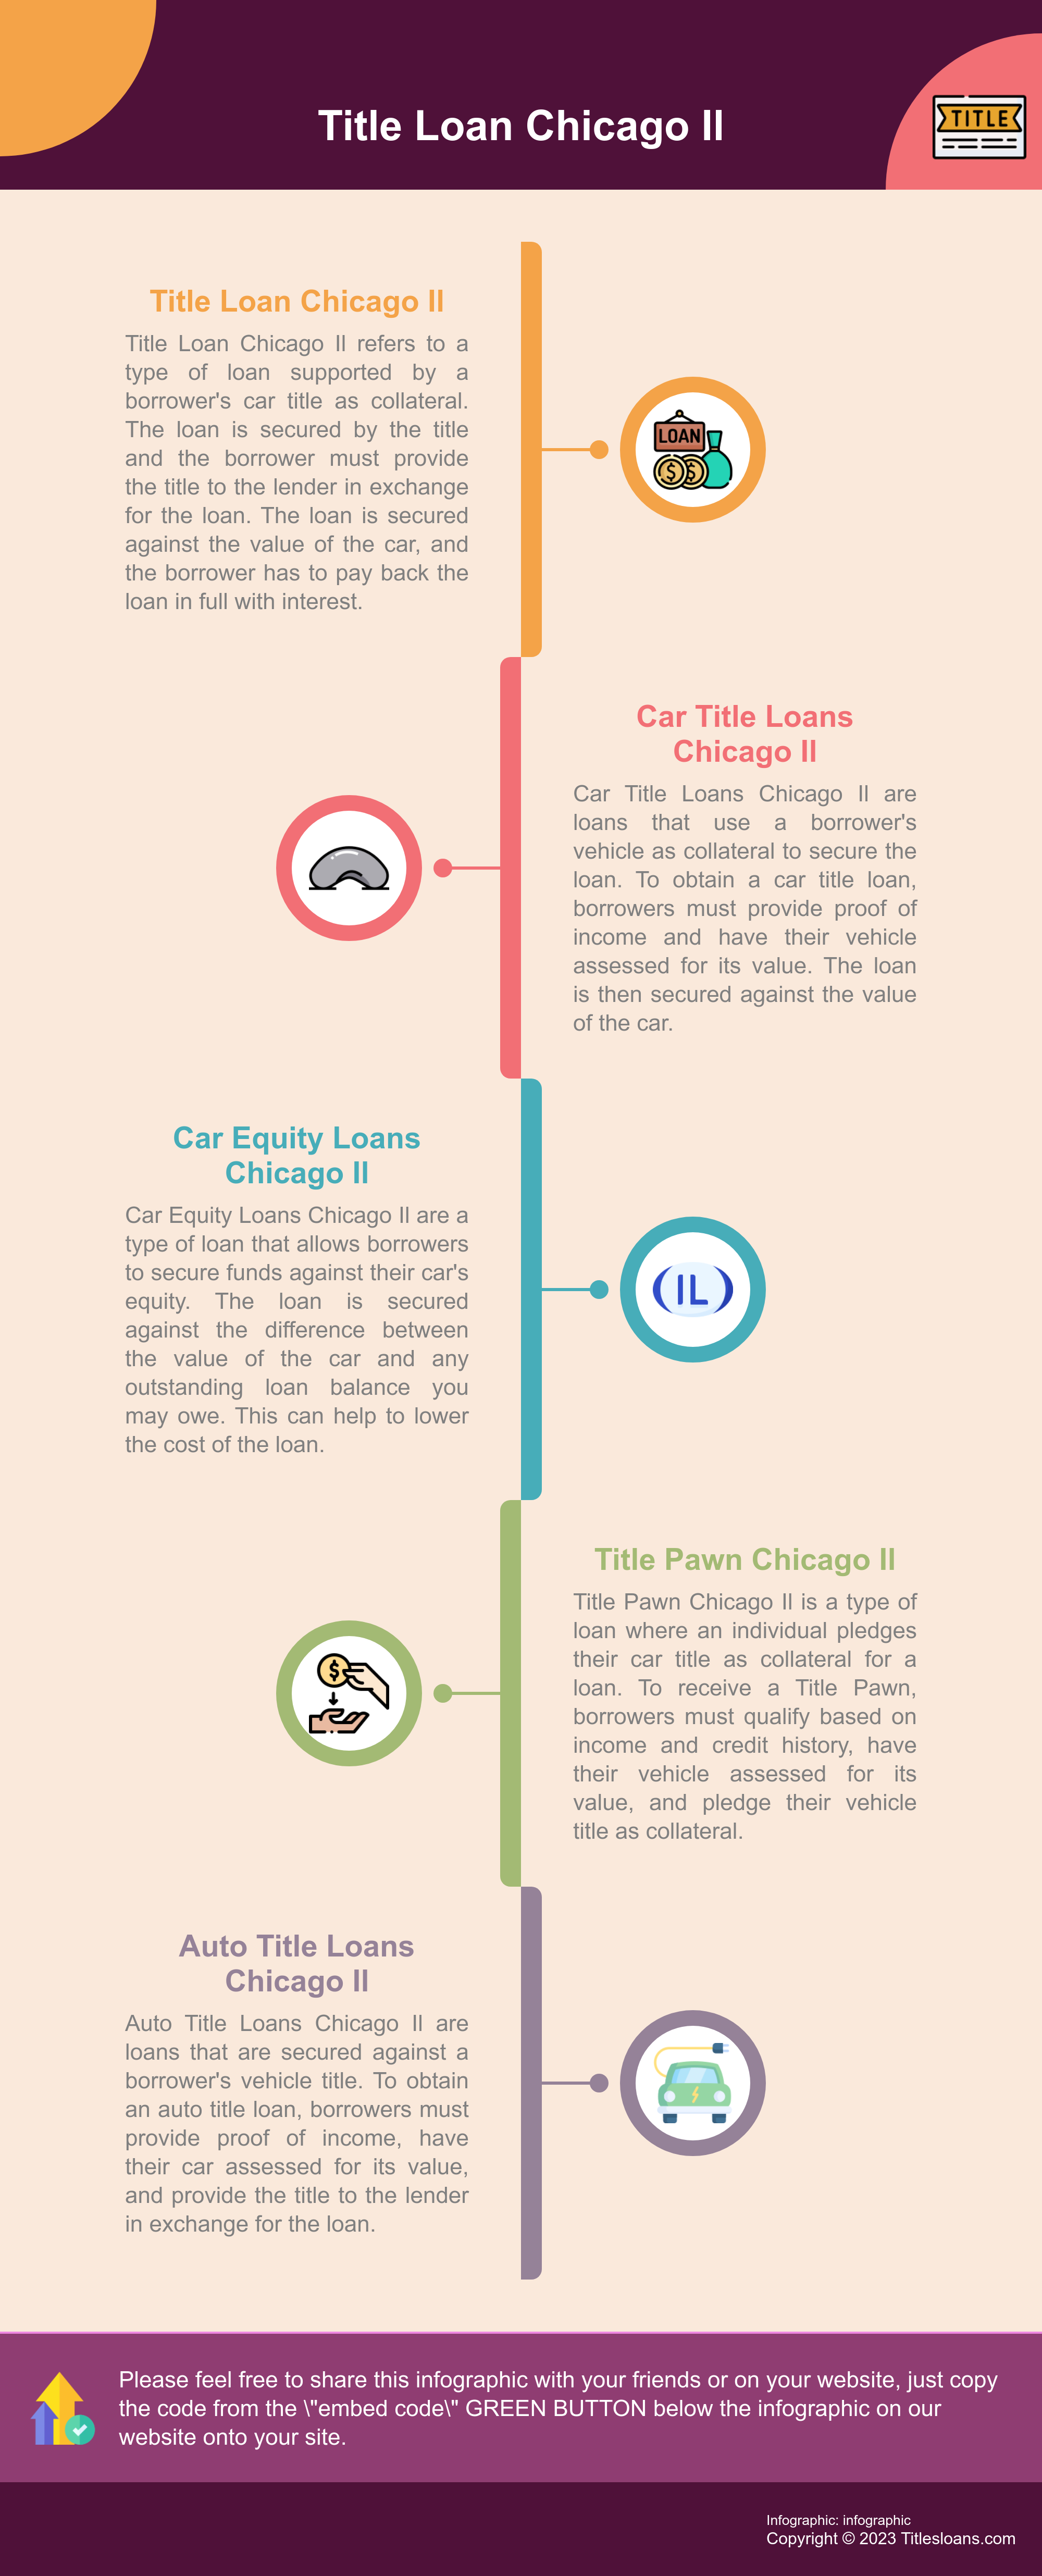 Infographic: Title Loan Chicago Il 